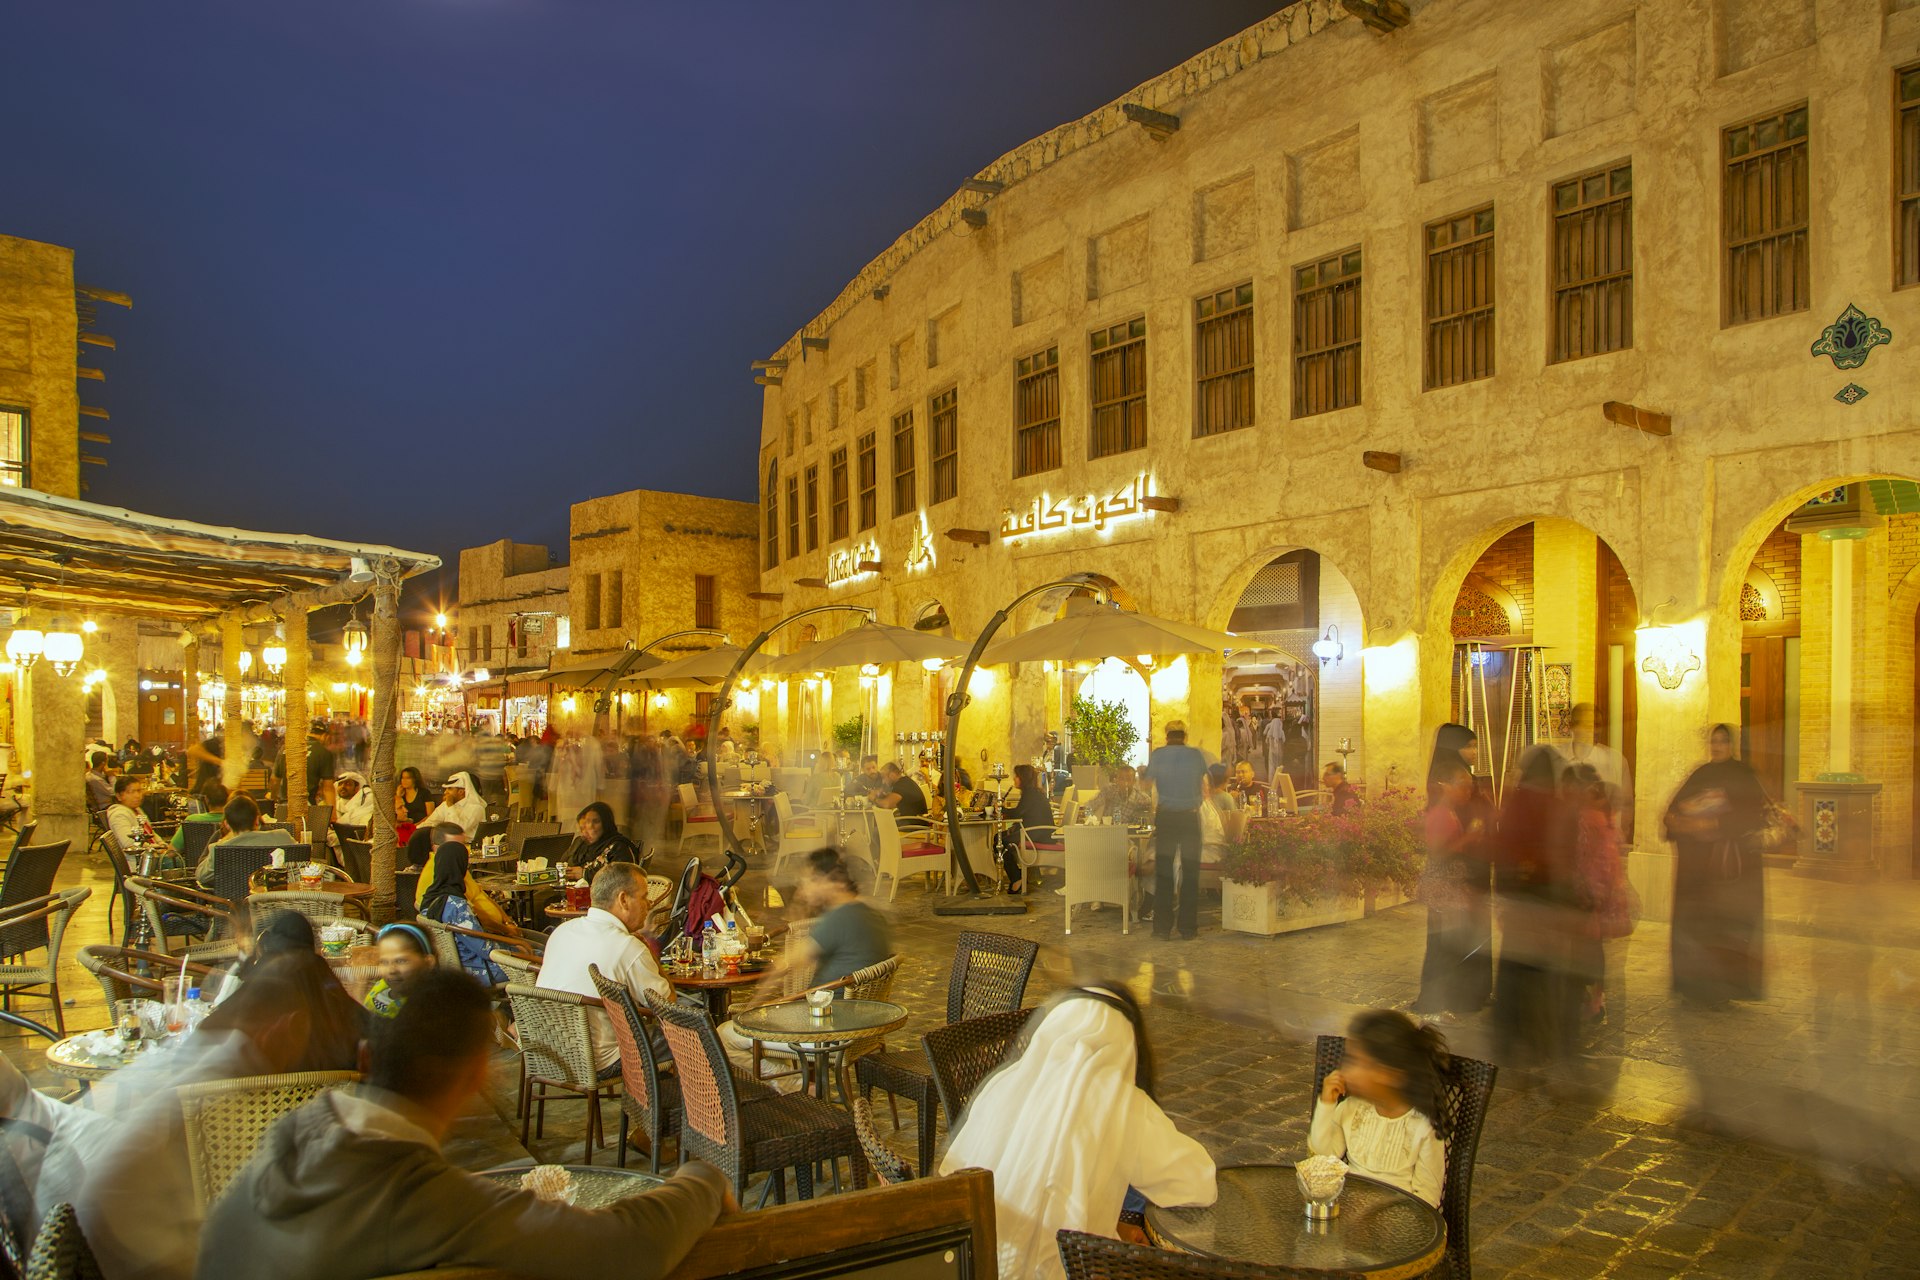 Illuminated traditional houses and people in outdoor restaurants in the historical district of Doha.